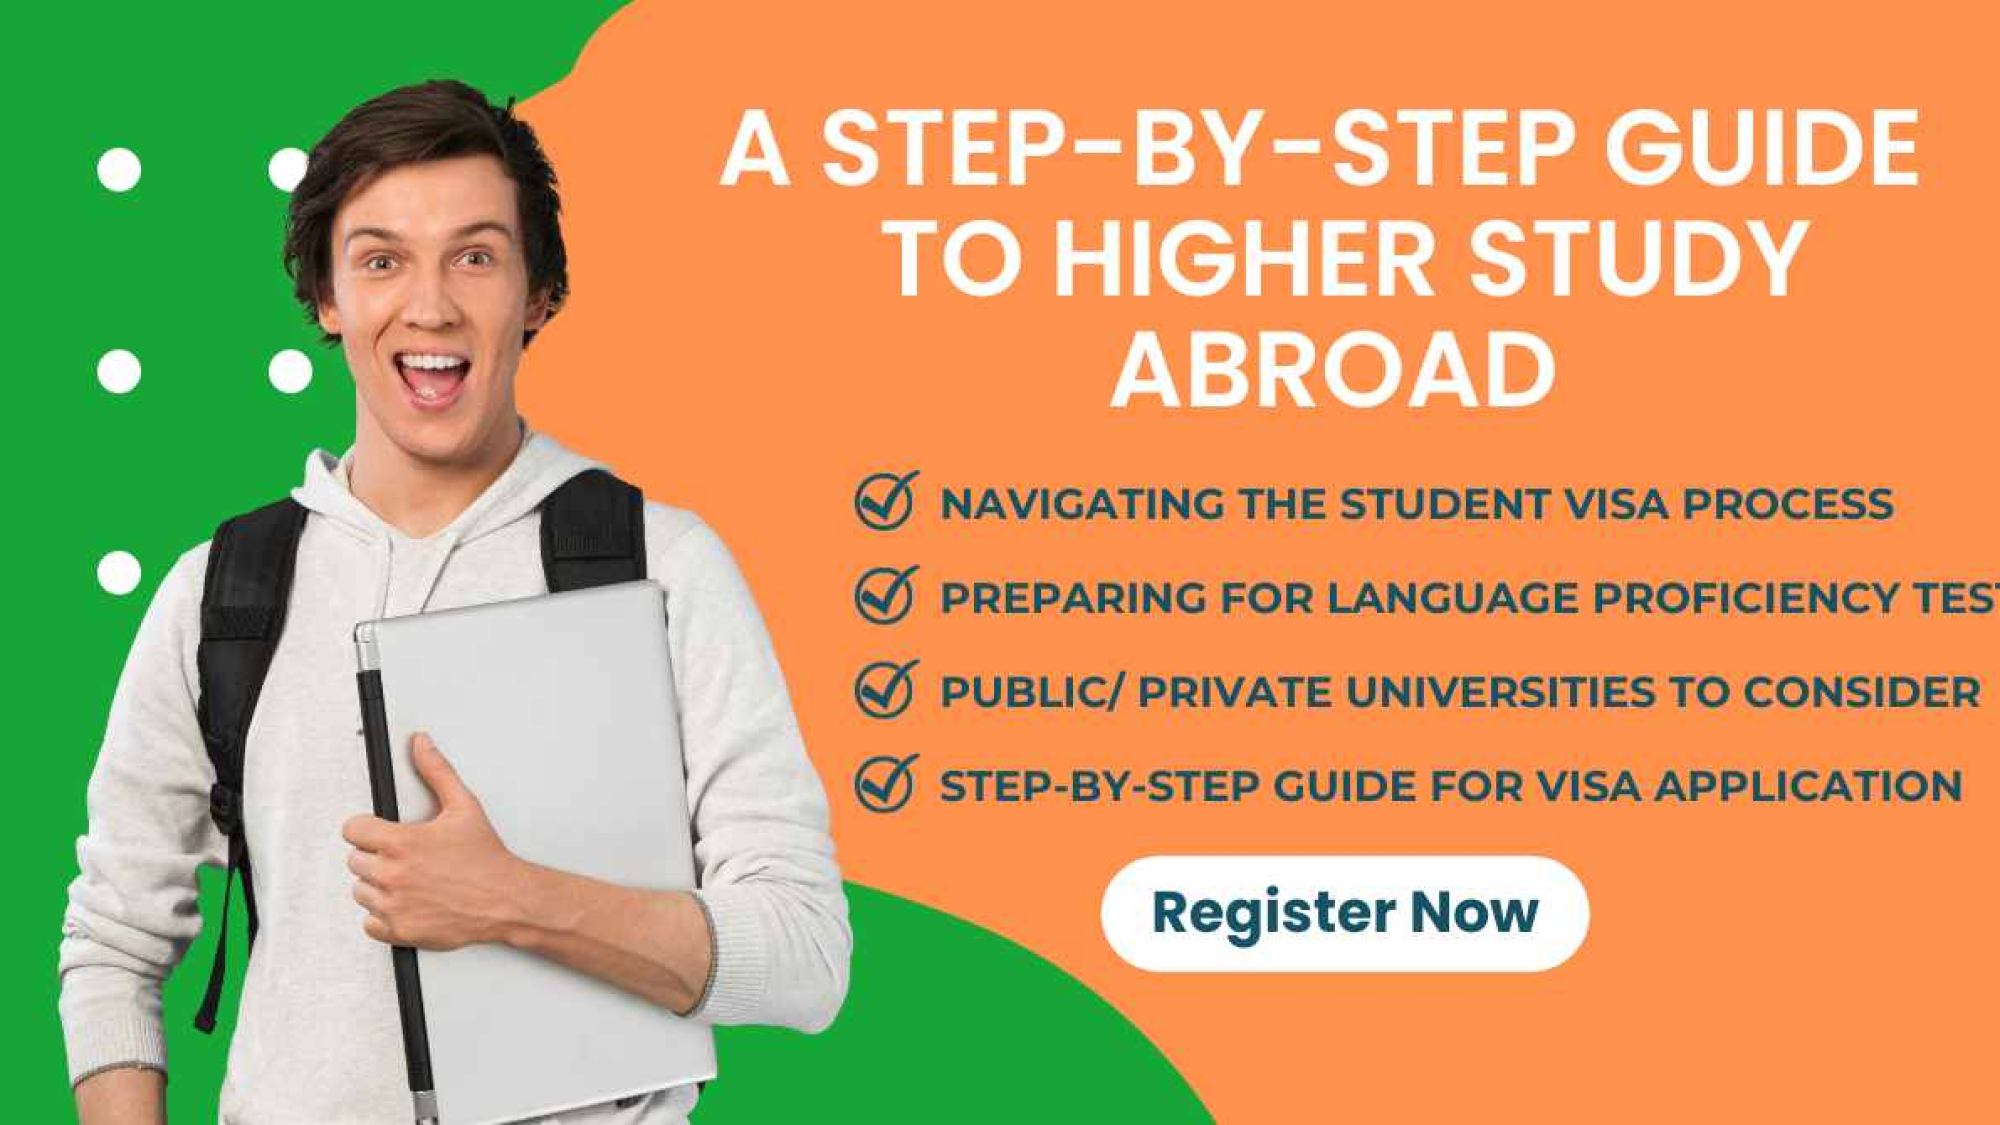 A Step-by-Step Guide to Higher Education through Study Abroad from Bangladesh